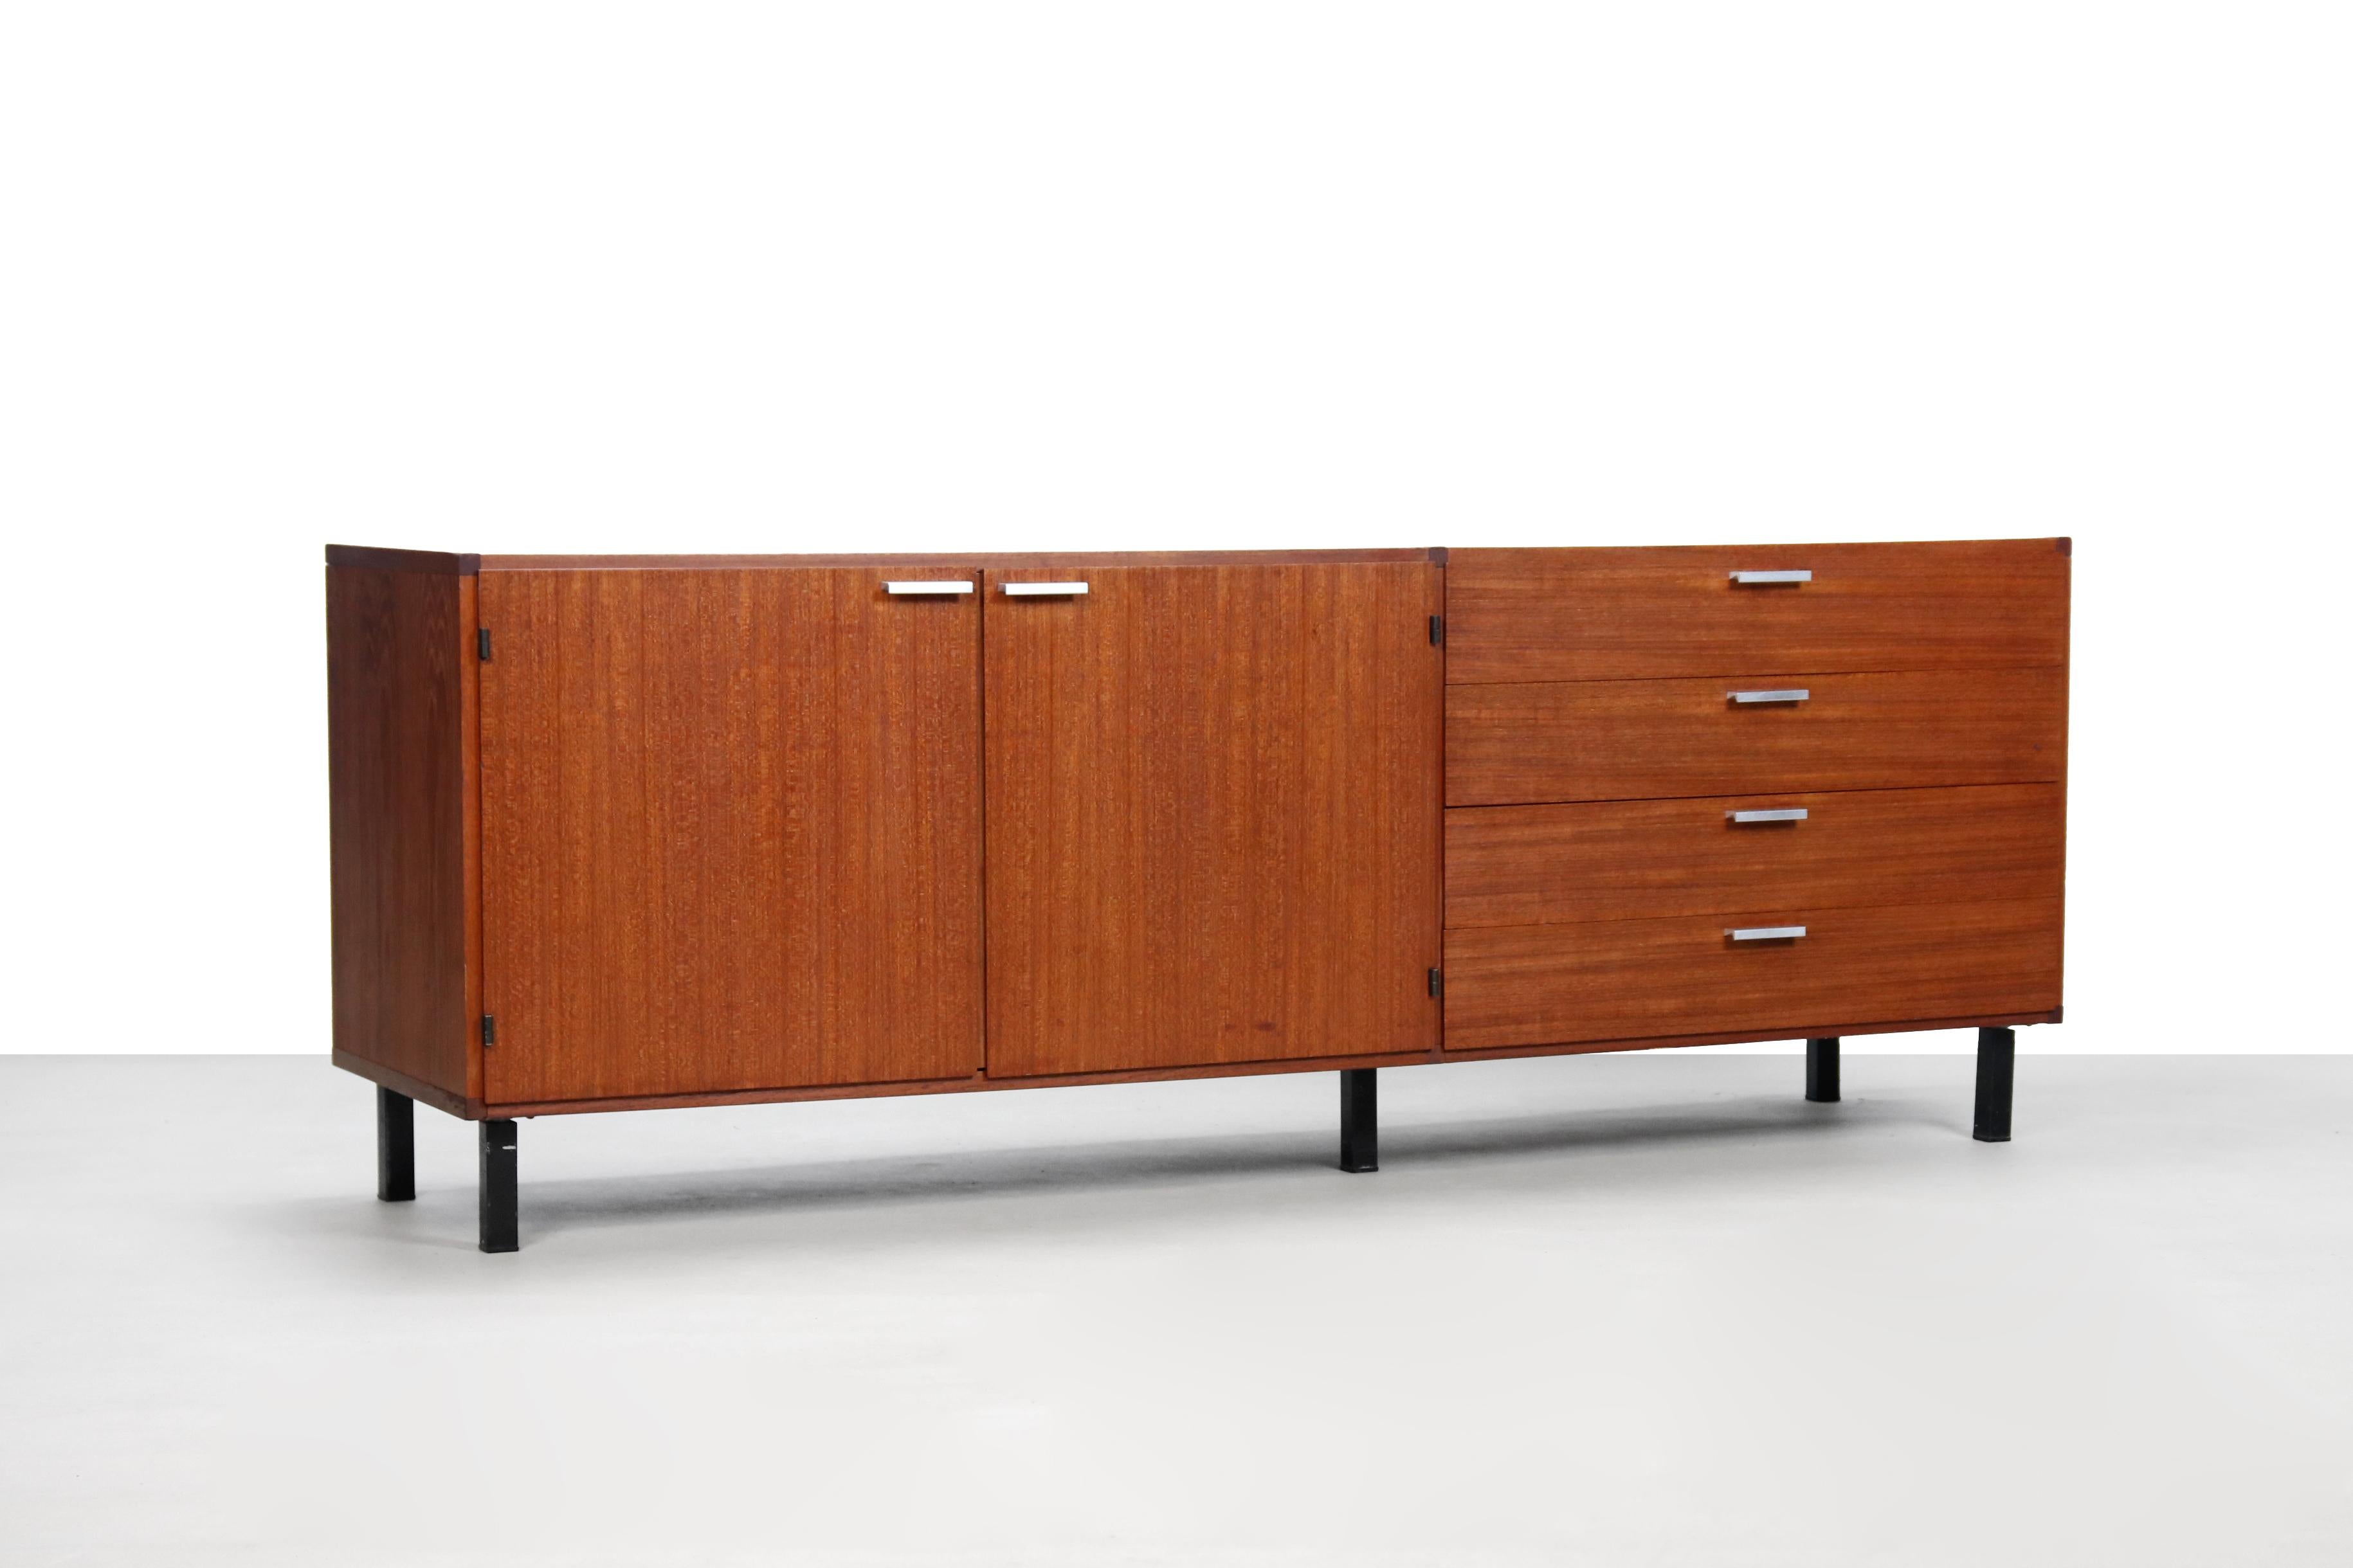 Beautiful teak sideboard designed by Cees Braakman for Pastoe. This sideboard comes from the made to measure series where stainless steel handles are used. This sideboard consists of two teak doors and 4 curved plywood anti-dust drawers.